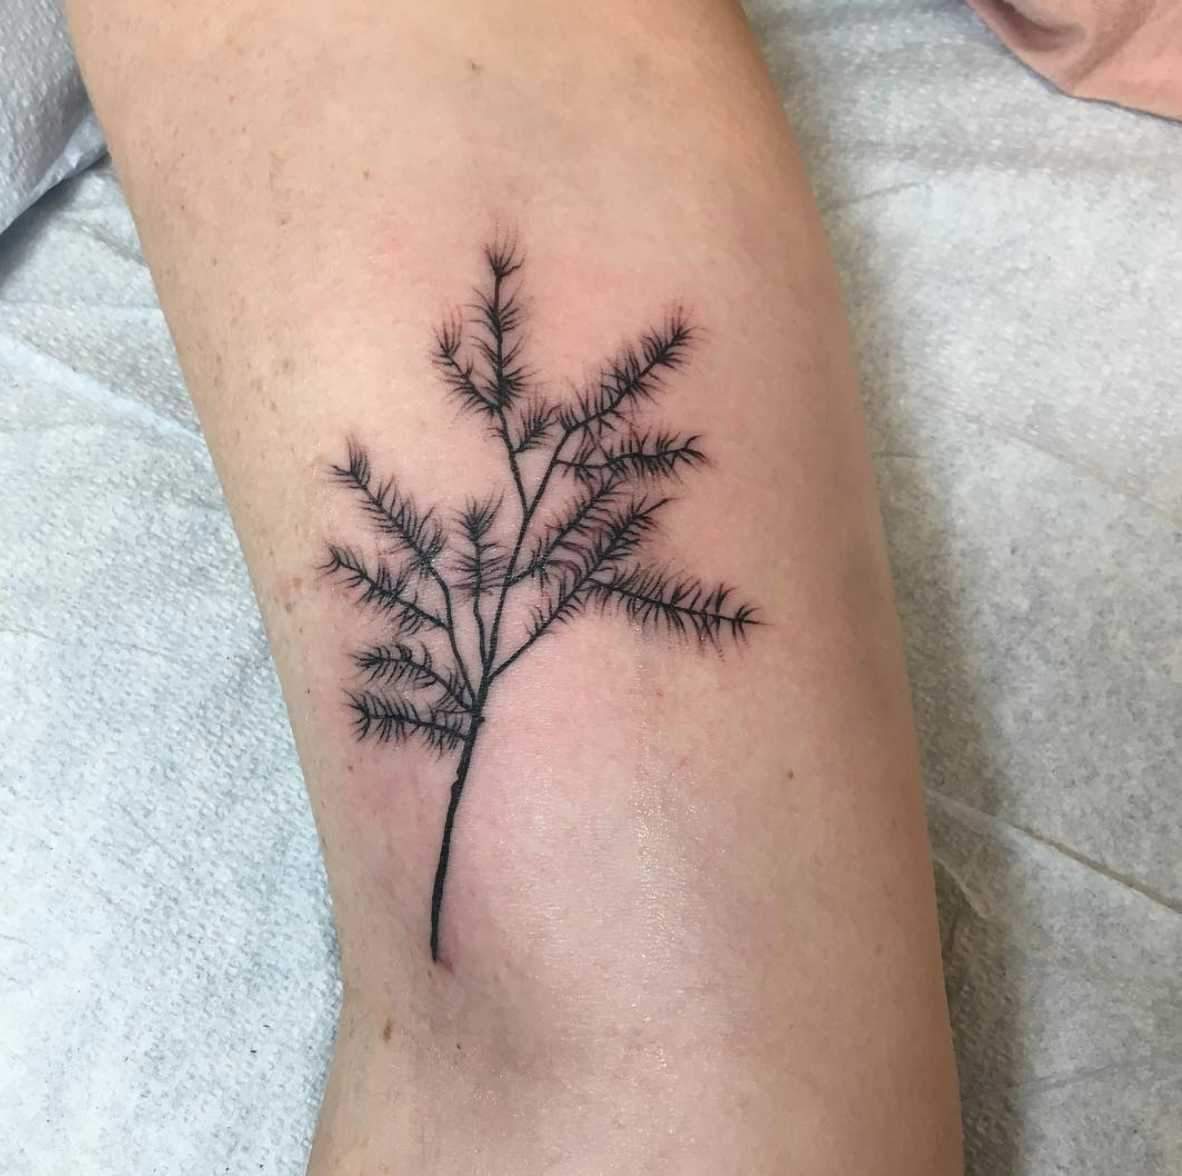 Tattoo Meaning New Beginning: A Guide to the Symbolism and Interpretation of Tattoos that Represent a Fresh Start or a New Beginning.